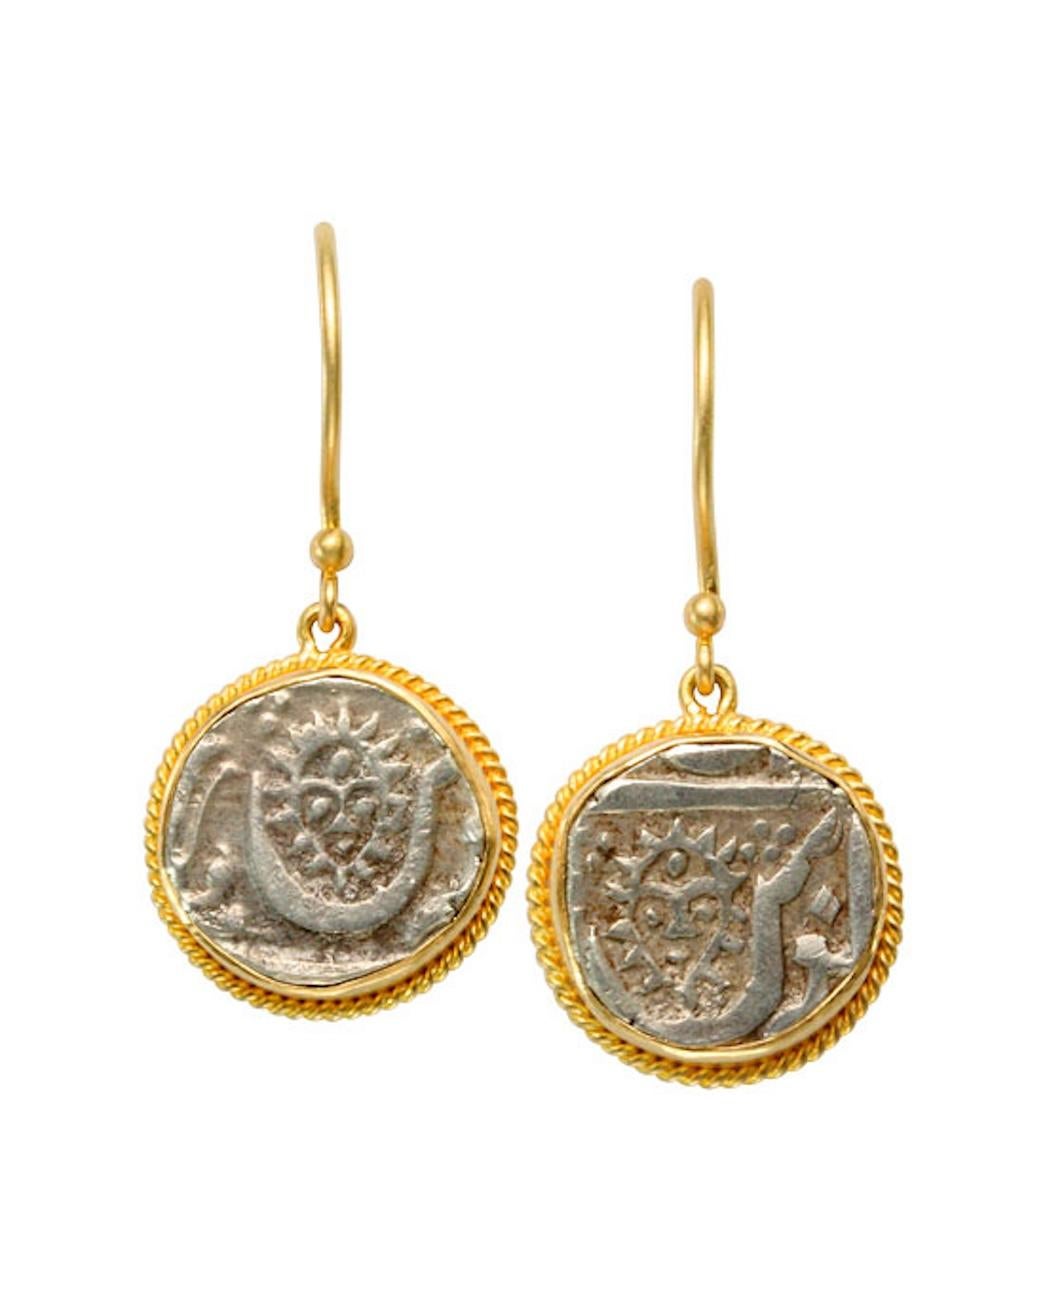 1850's India Sun-face Coin 18K Gold Wire Earrings In New Condition For Sale In Soquel, CA